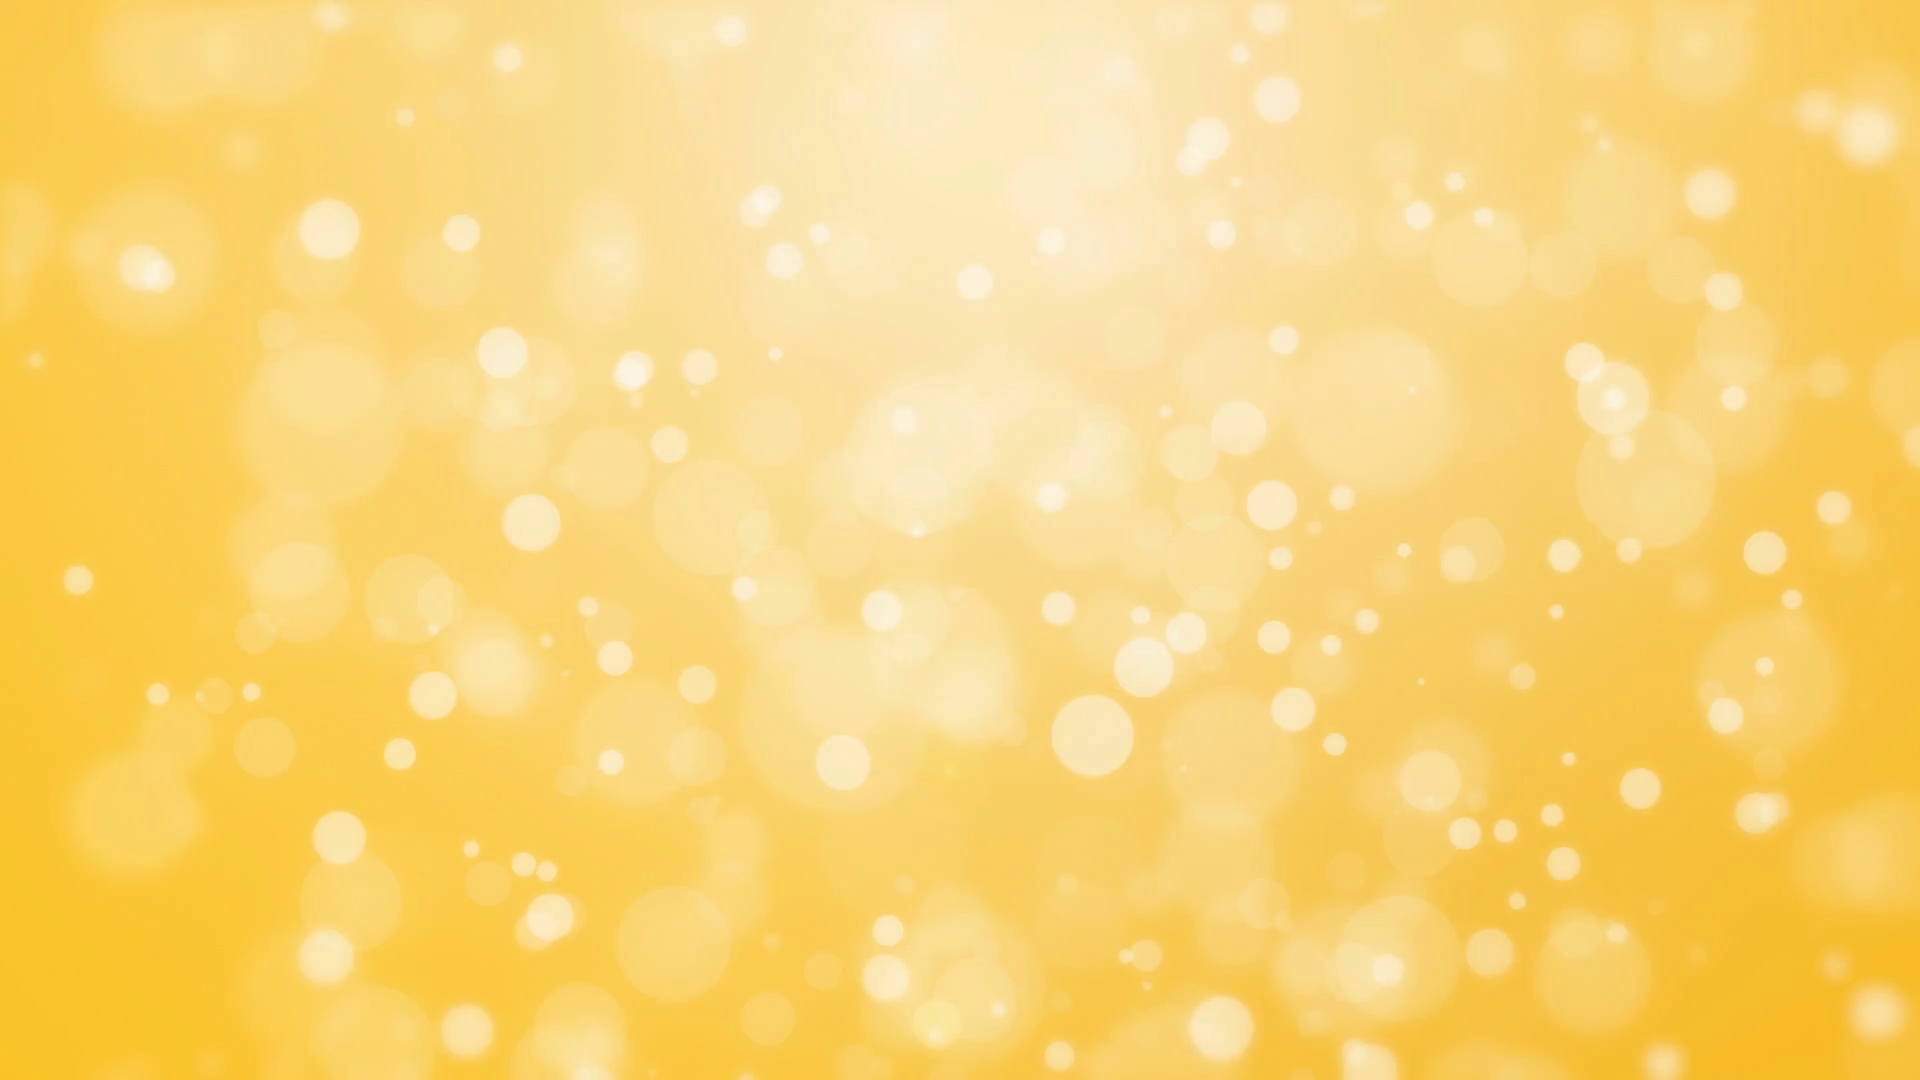 Cheerful golden yellow bokeh background with floating glowing lights ...